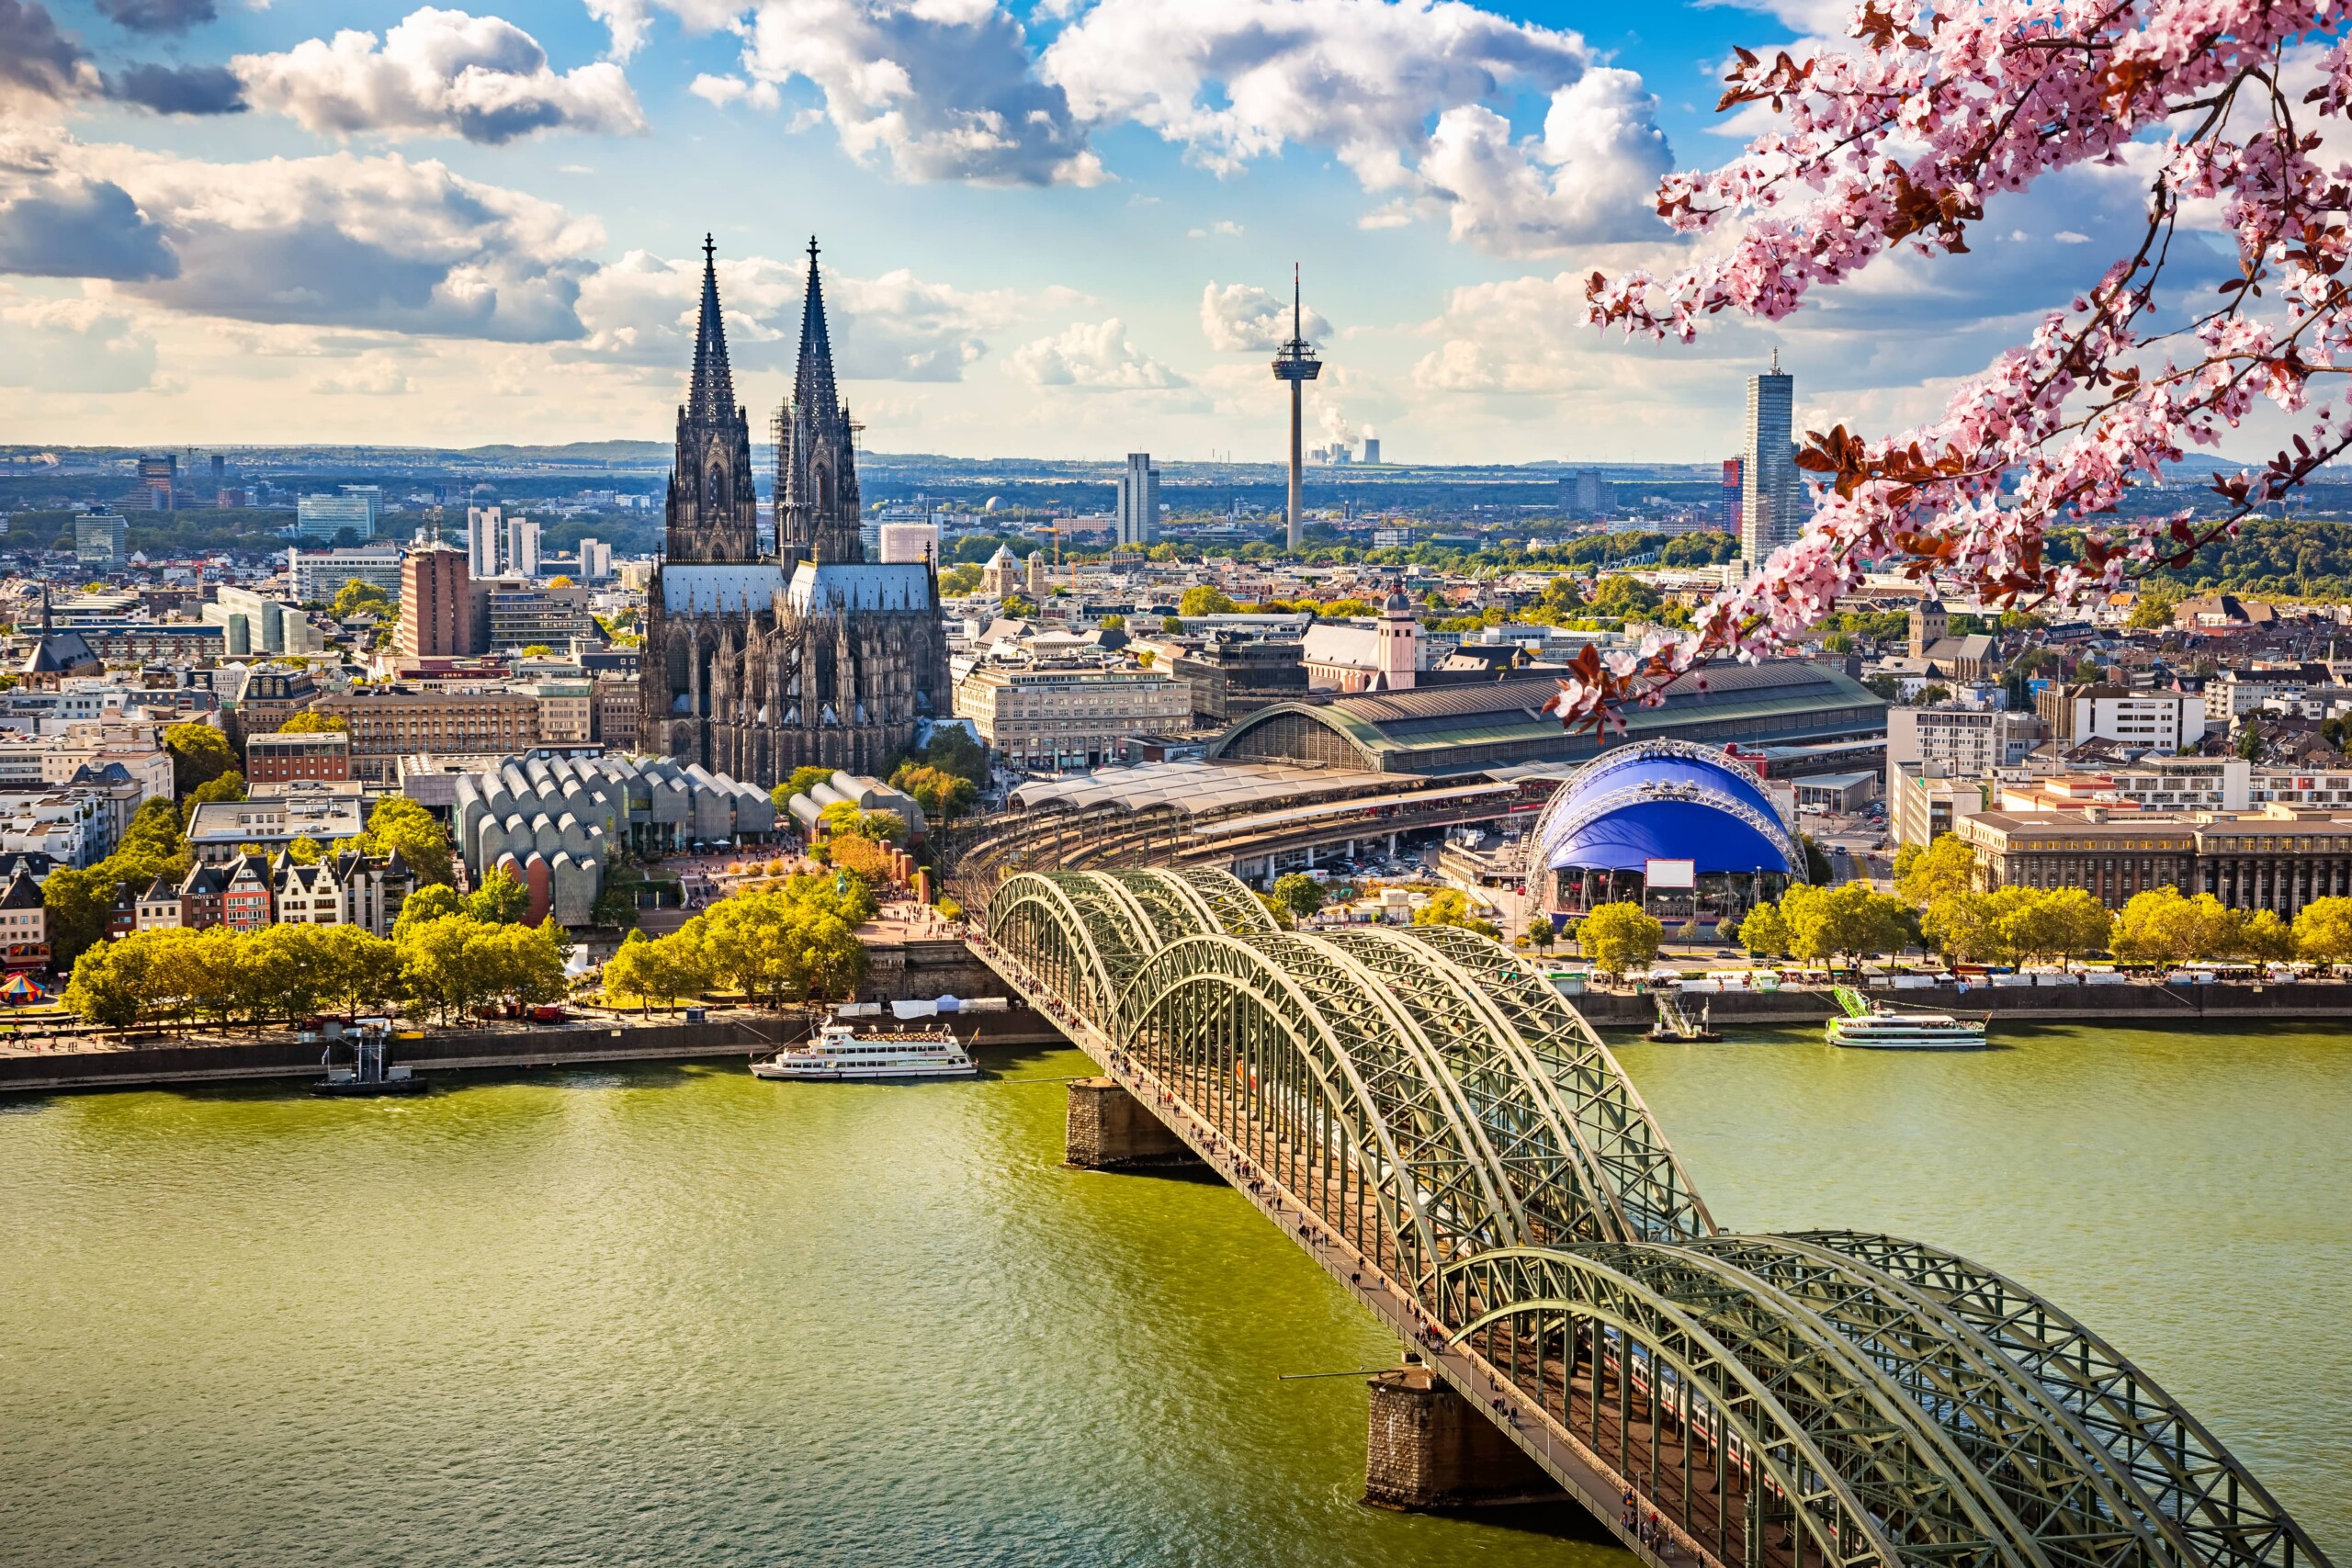 The city of Cologne, Germany